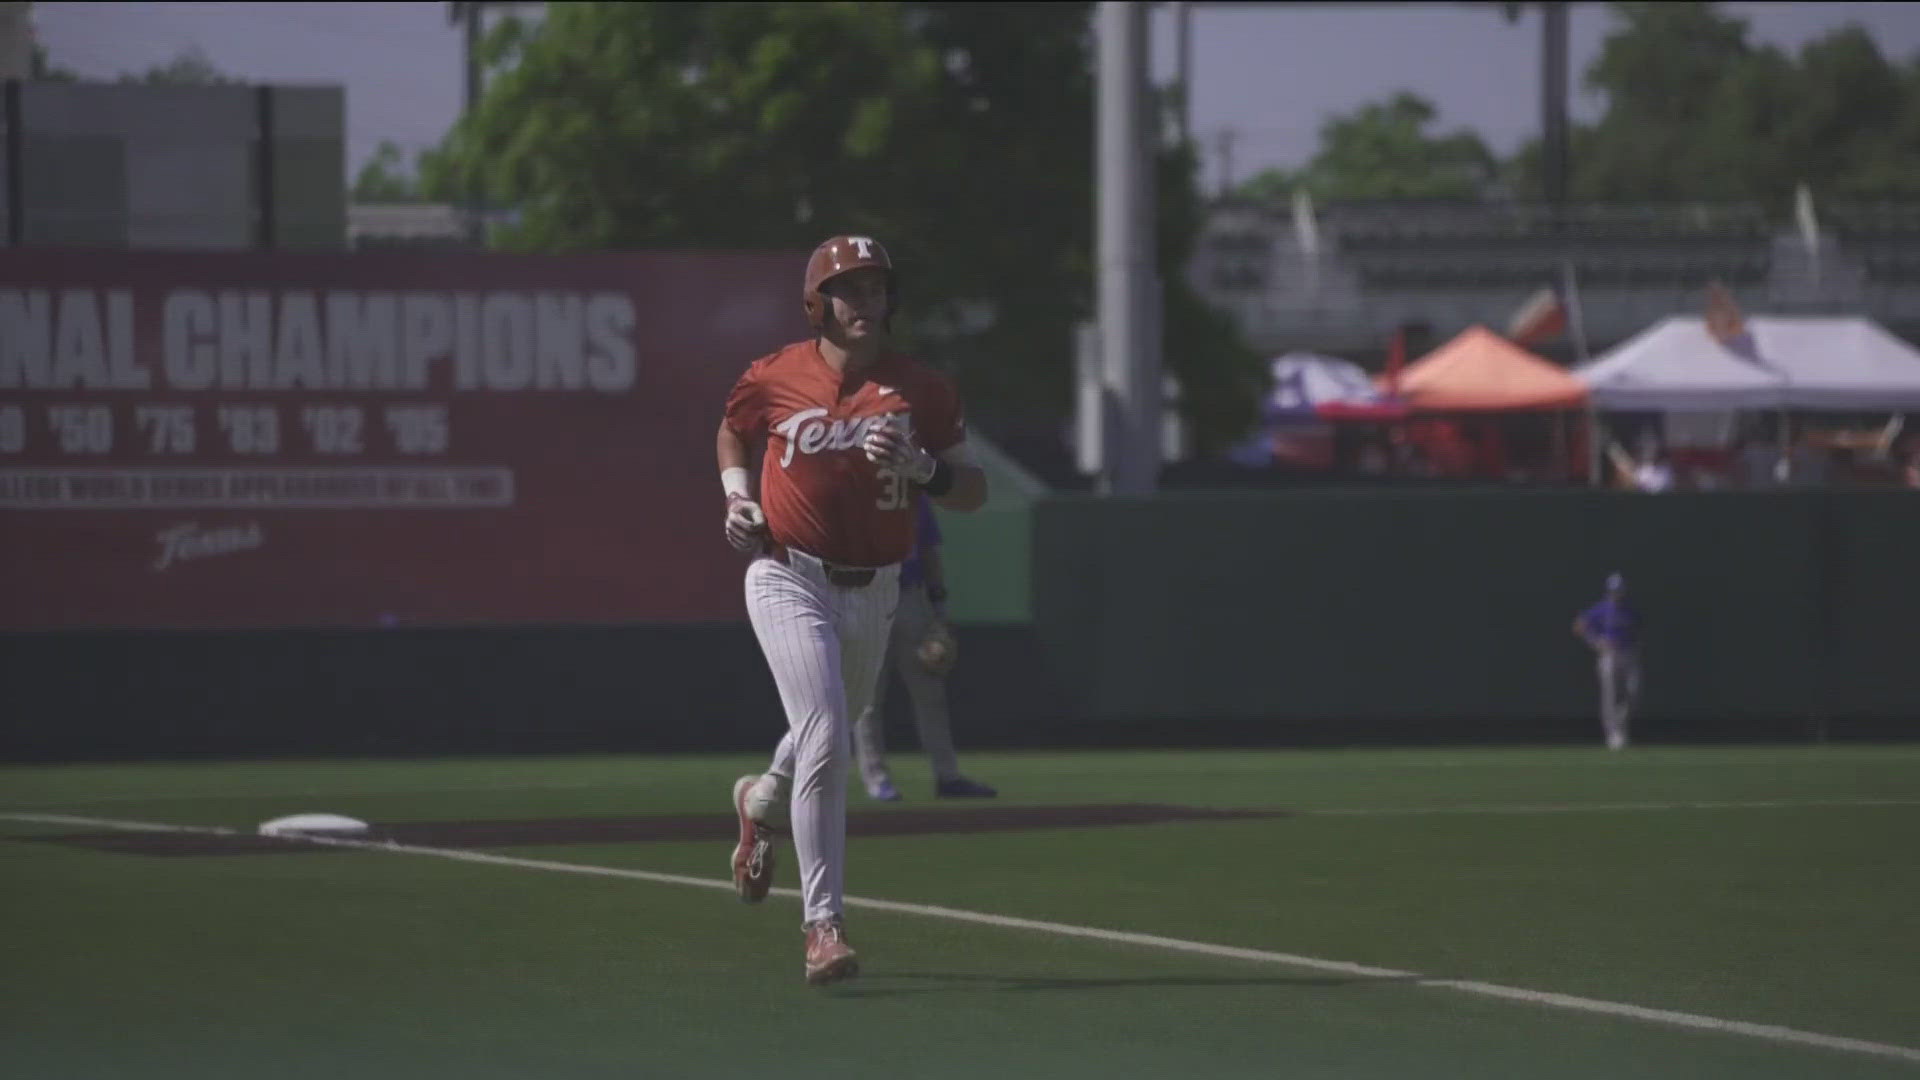 The Longhorns will now get set for the Big 12 Tournament.